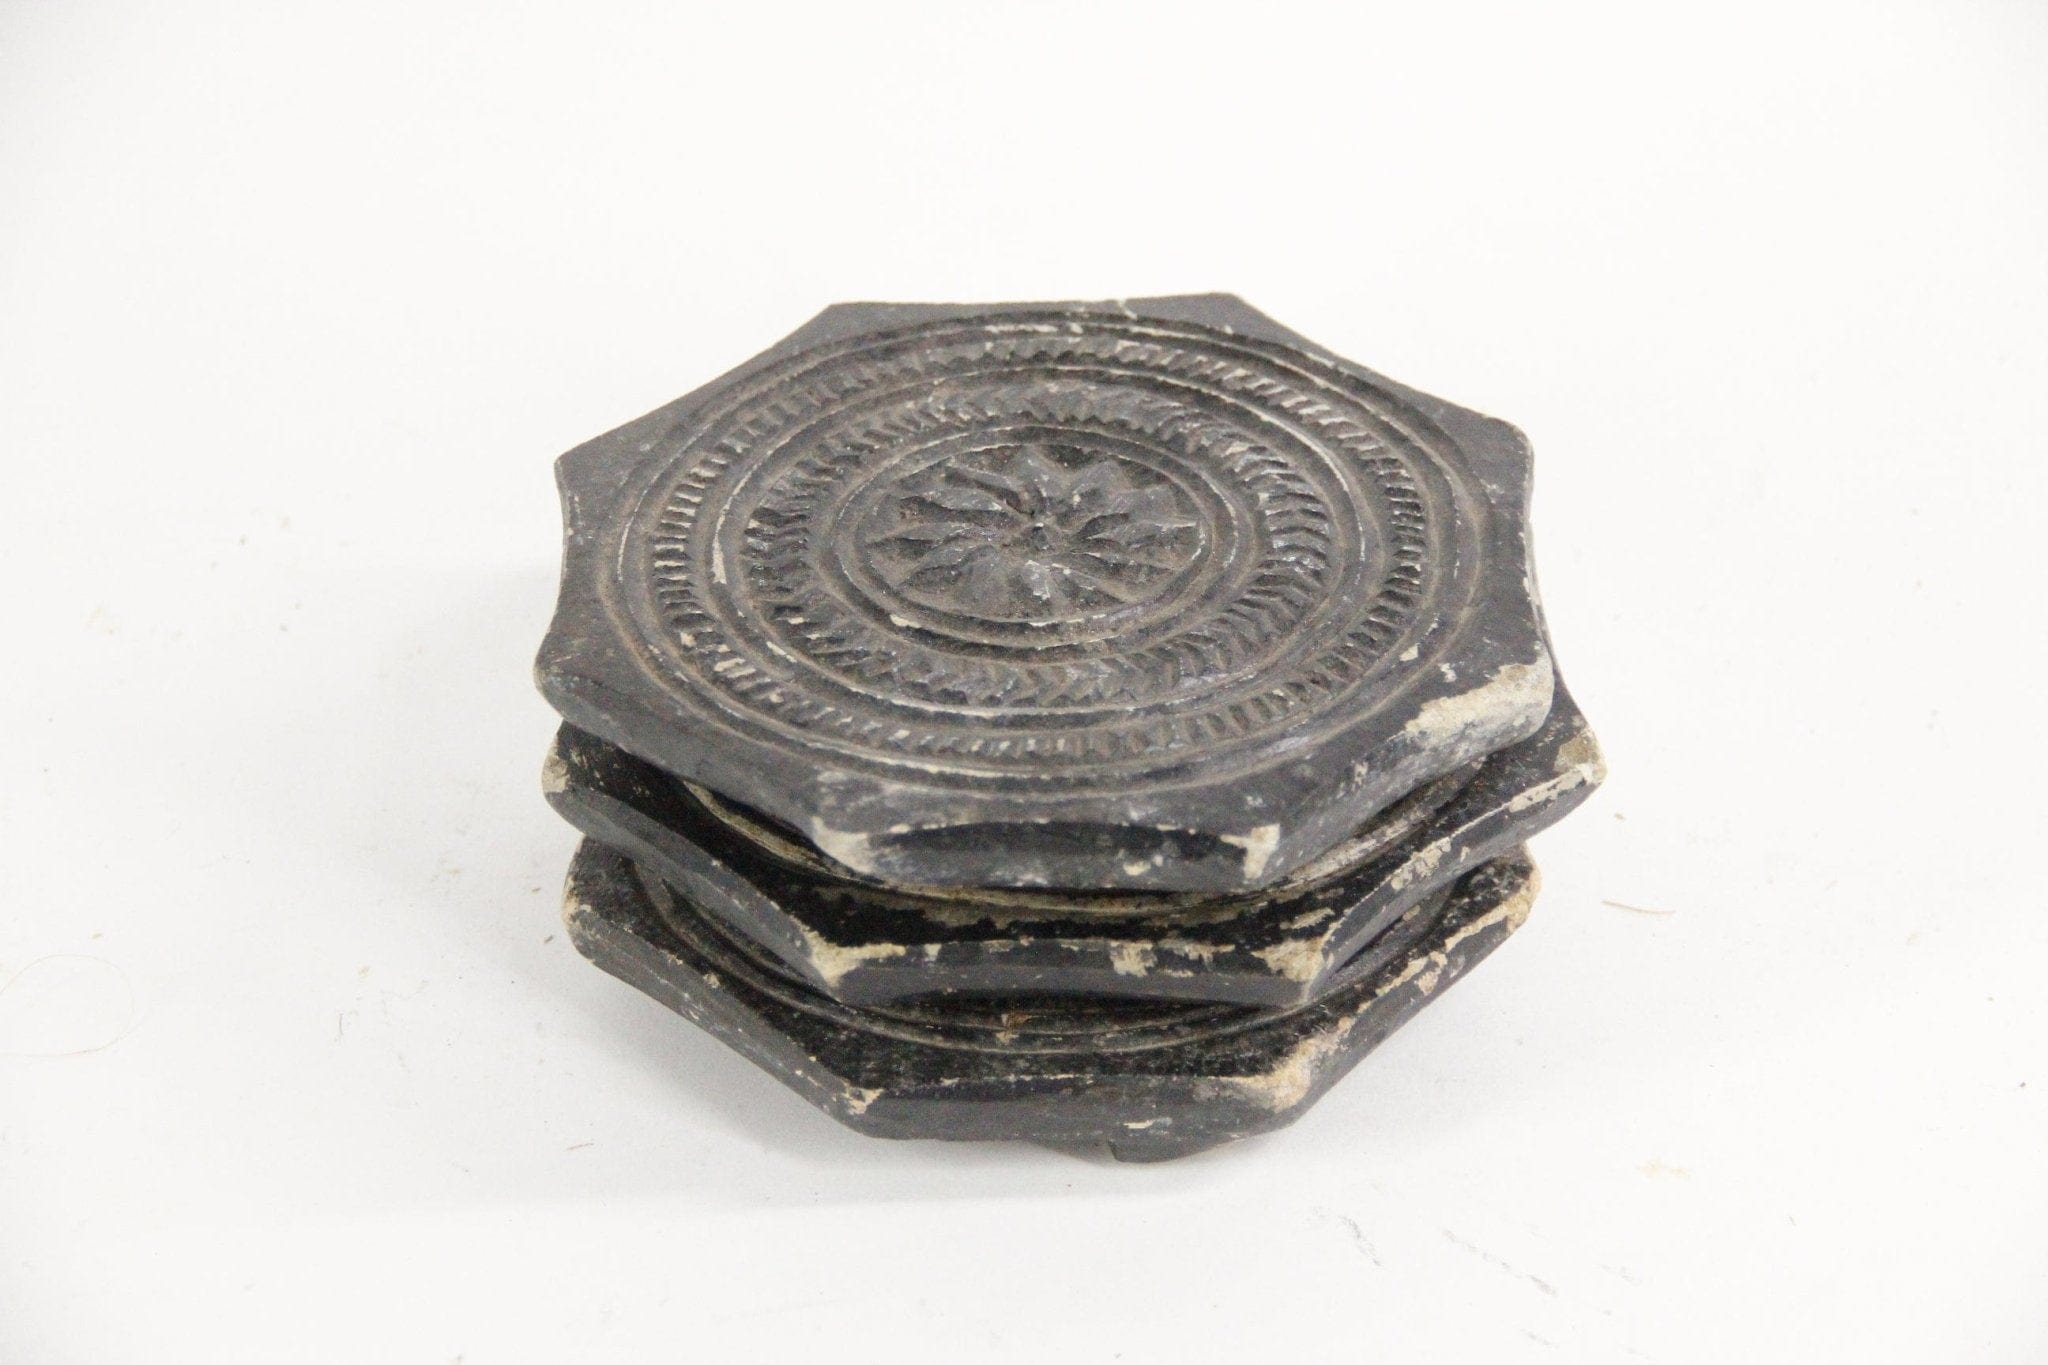 Vintage Footed Octagonal Soapstone Biscuit Mold | Carved Stone Plate - Debra Hall Lifestyle